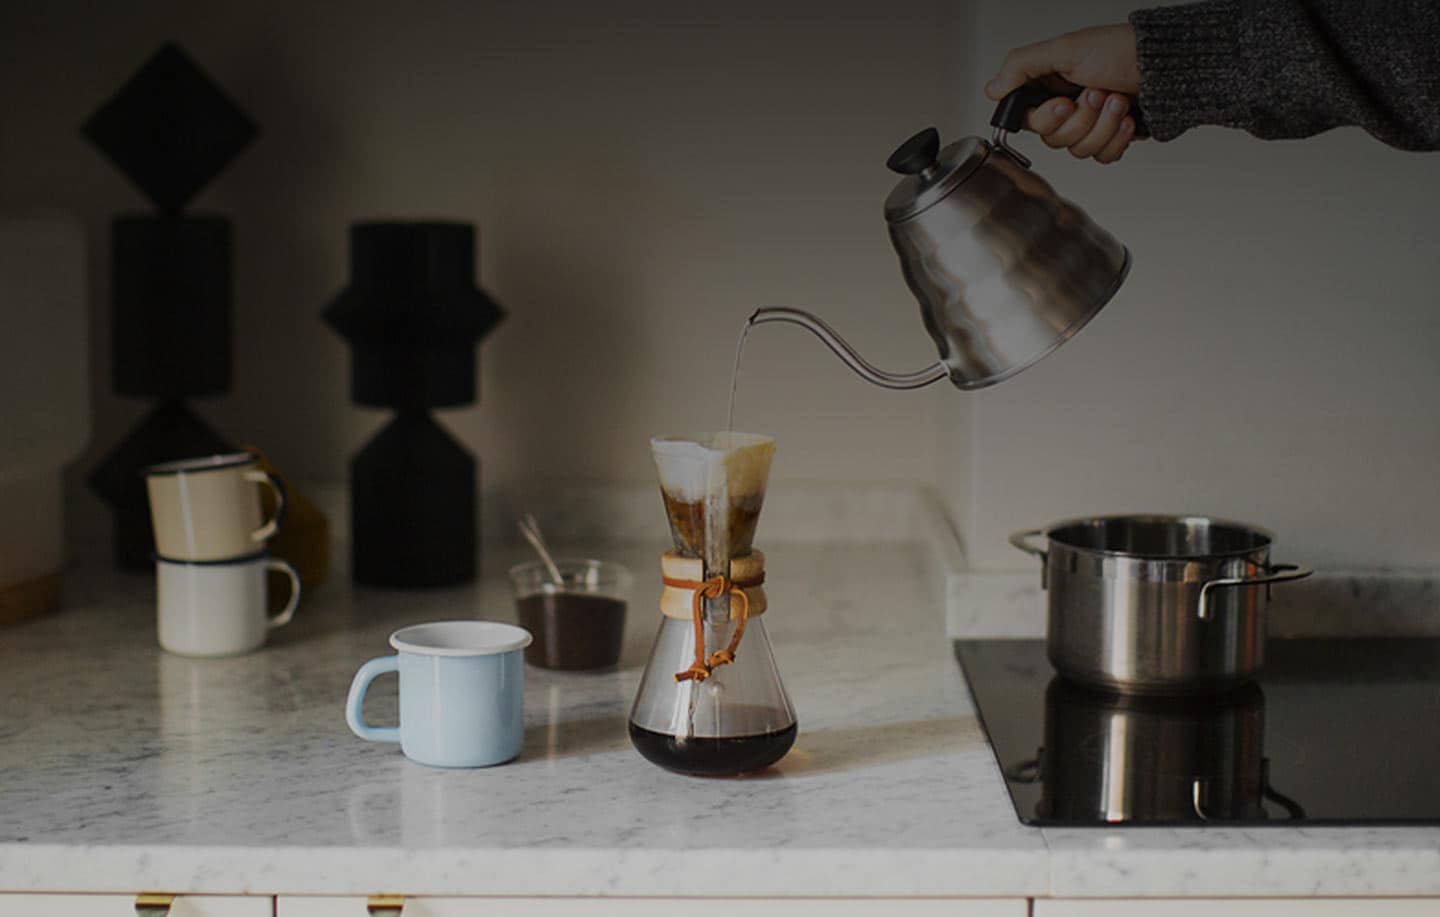 How to make a filter  coffee in a few steps